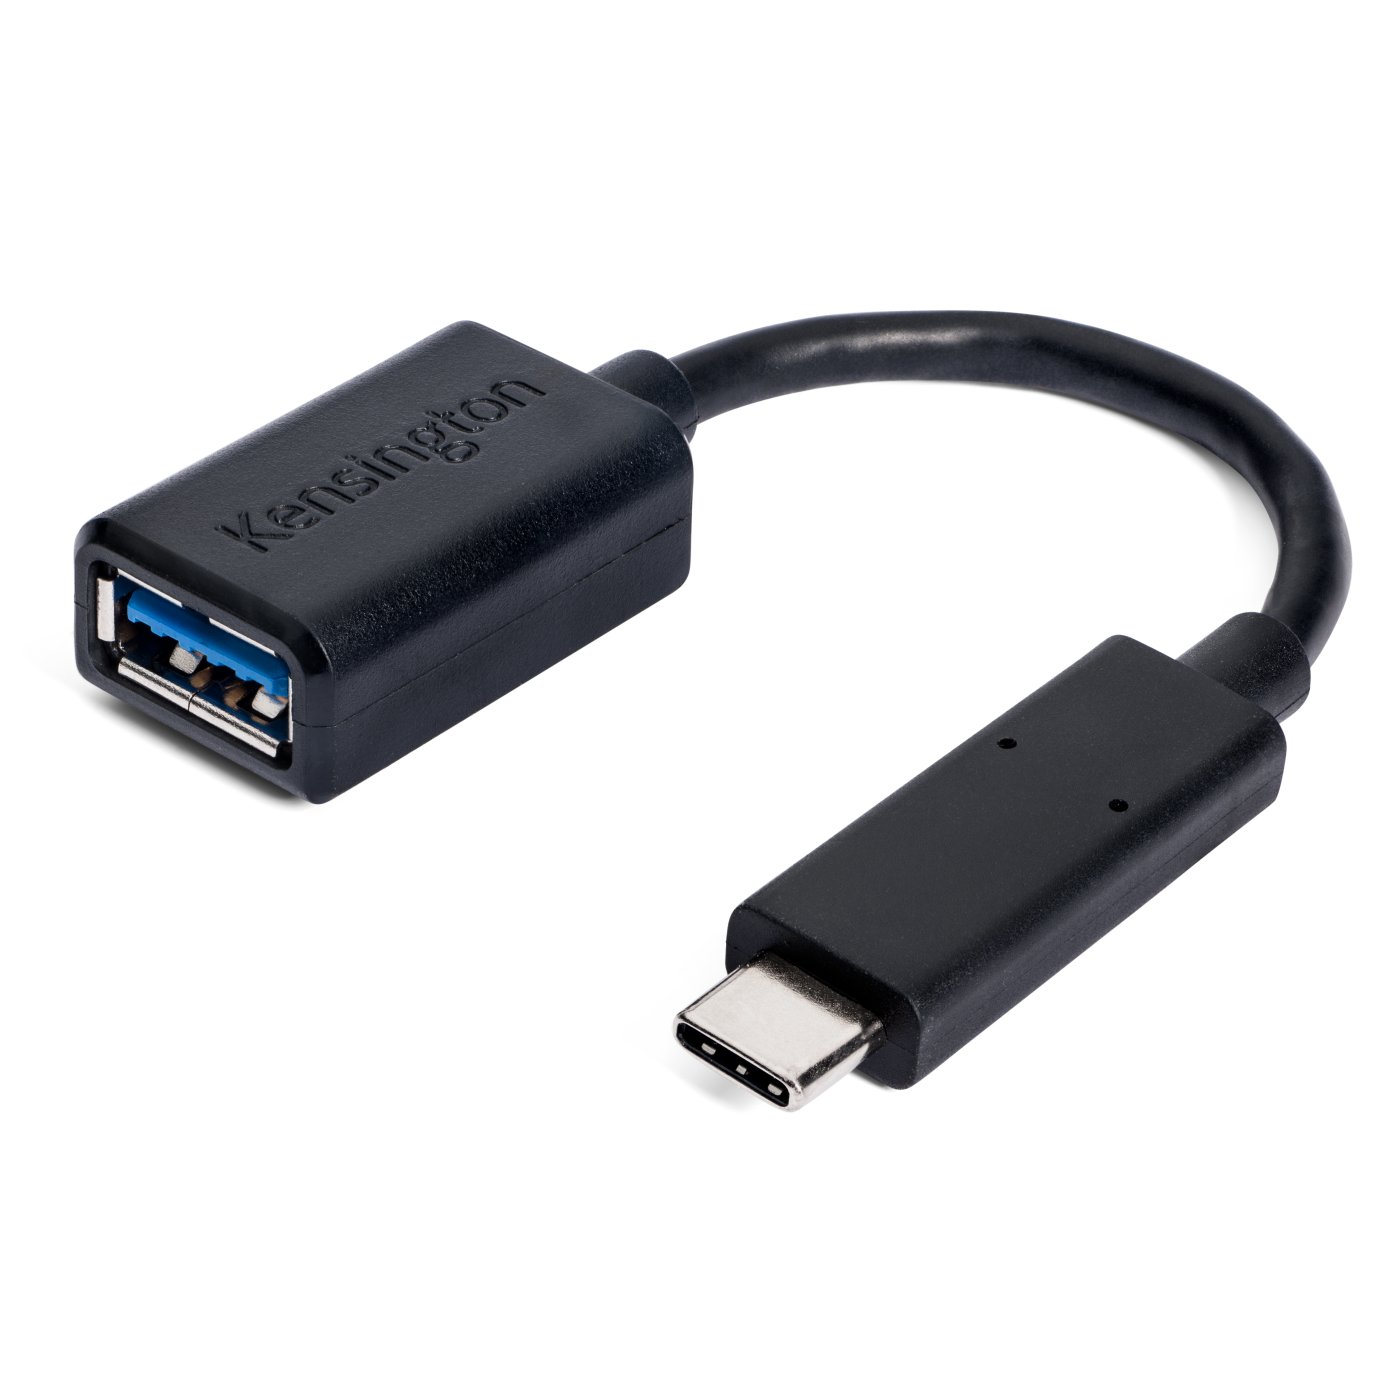 Kensington - Products - Connectivity - USB Hubs & Adapters - CA1000 ...